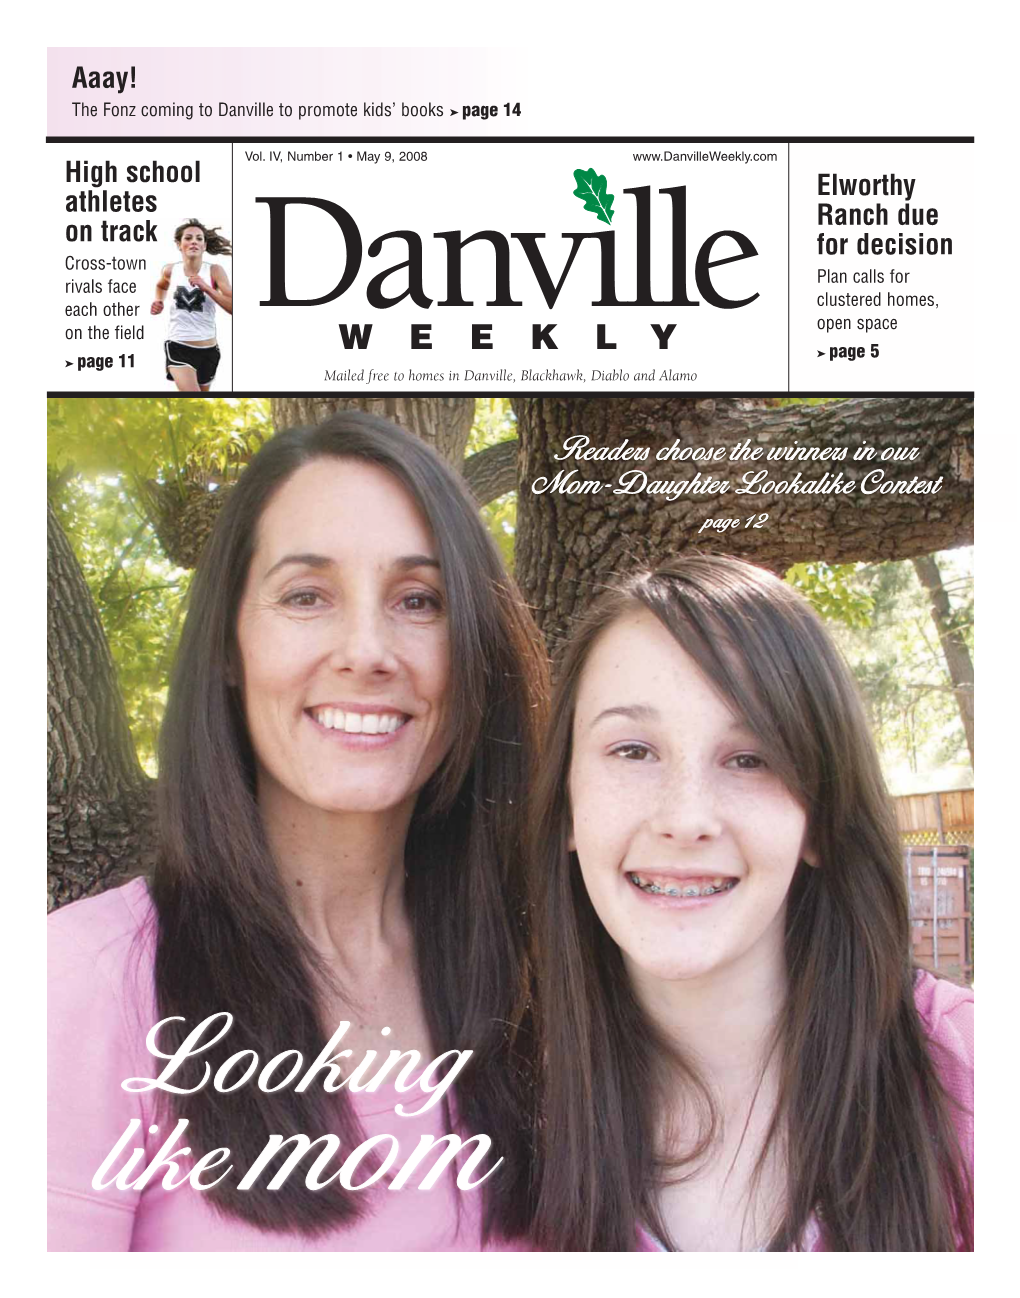 Walnut Creek 925-935-5300 the Danville Weekly Is Published Every Friday by Embarcadero Publishing Co., 315 Diablo Road, Suite 100, Danville, CA 94526; (925) 837-8300